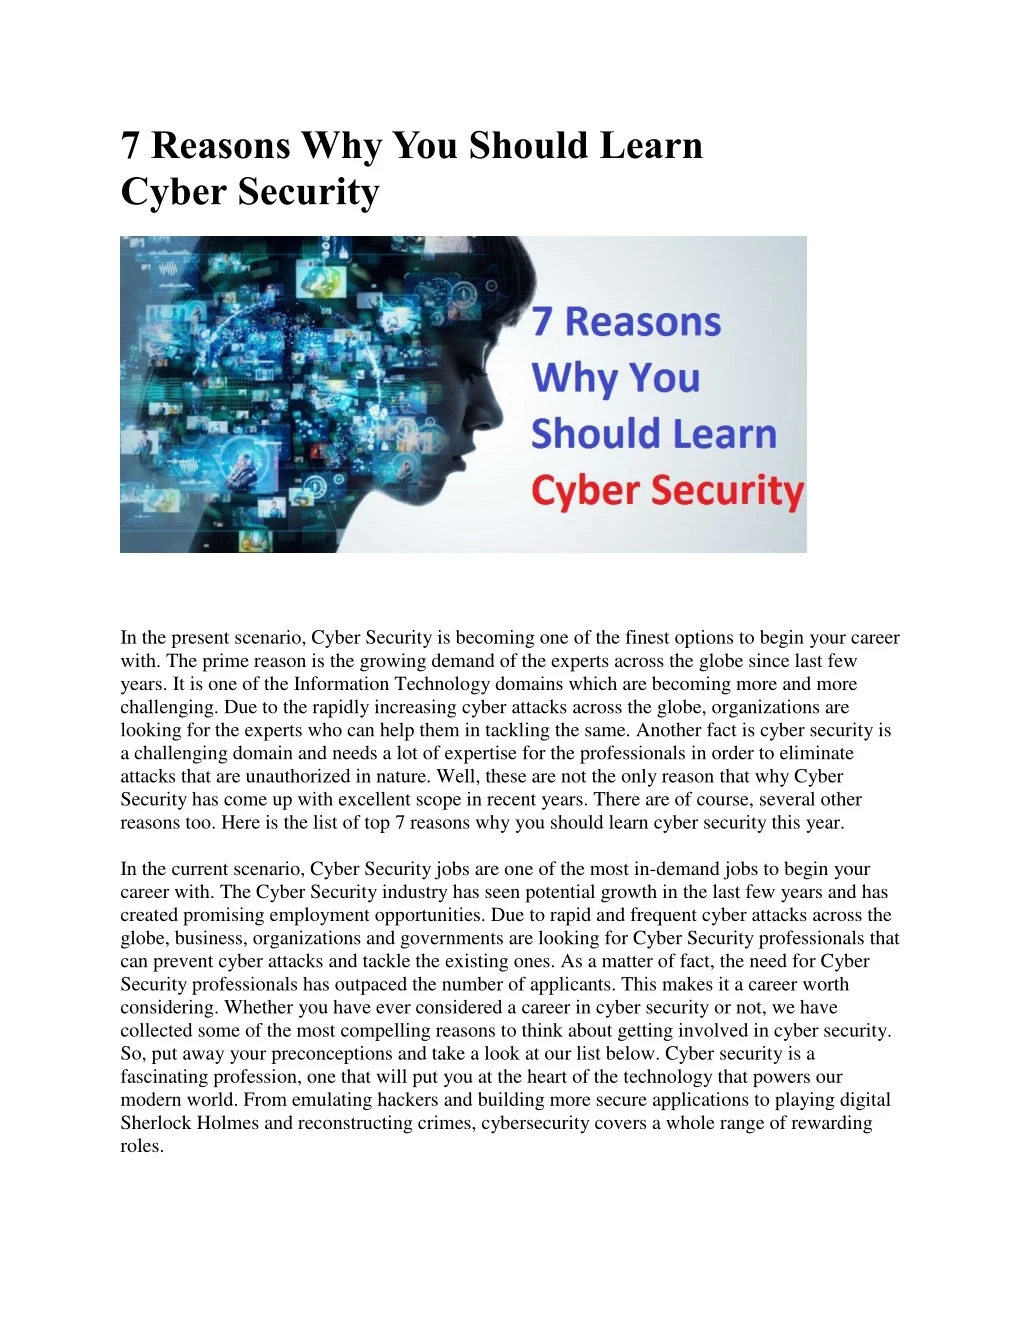 7 reasons why you should learn cyber security